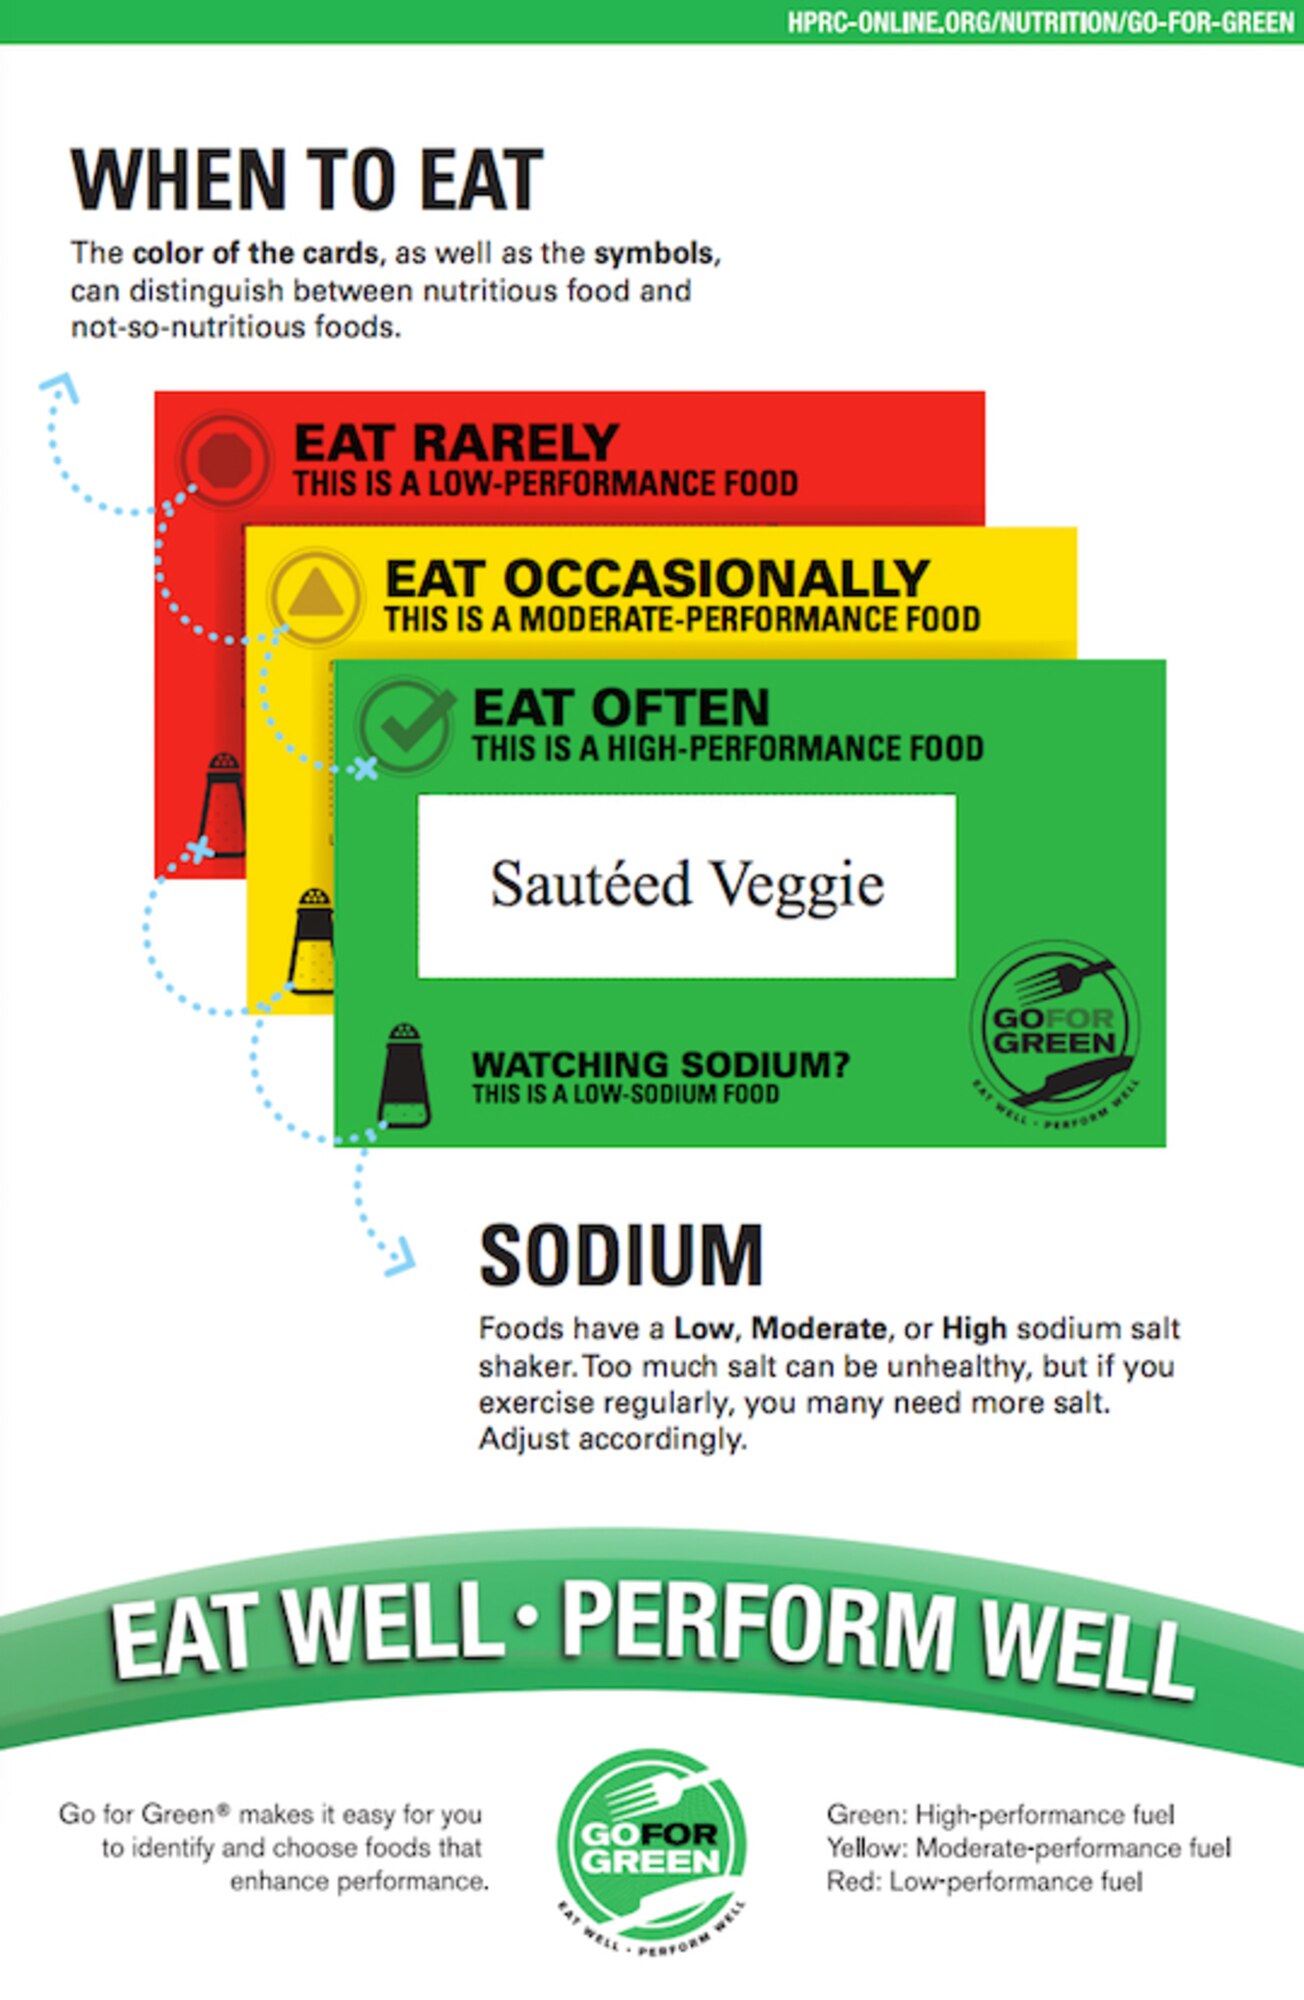 Go For Green signage makes it easier for patrons to see and select health food items at dining facilities. (Courtesy graphic)